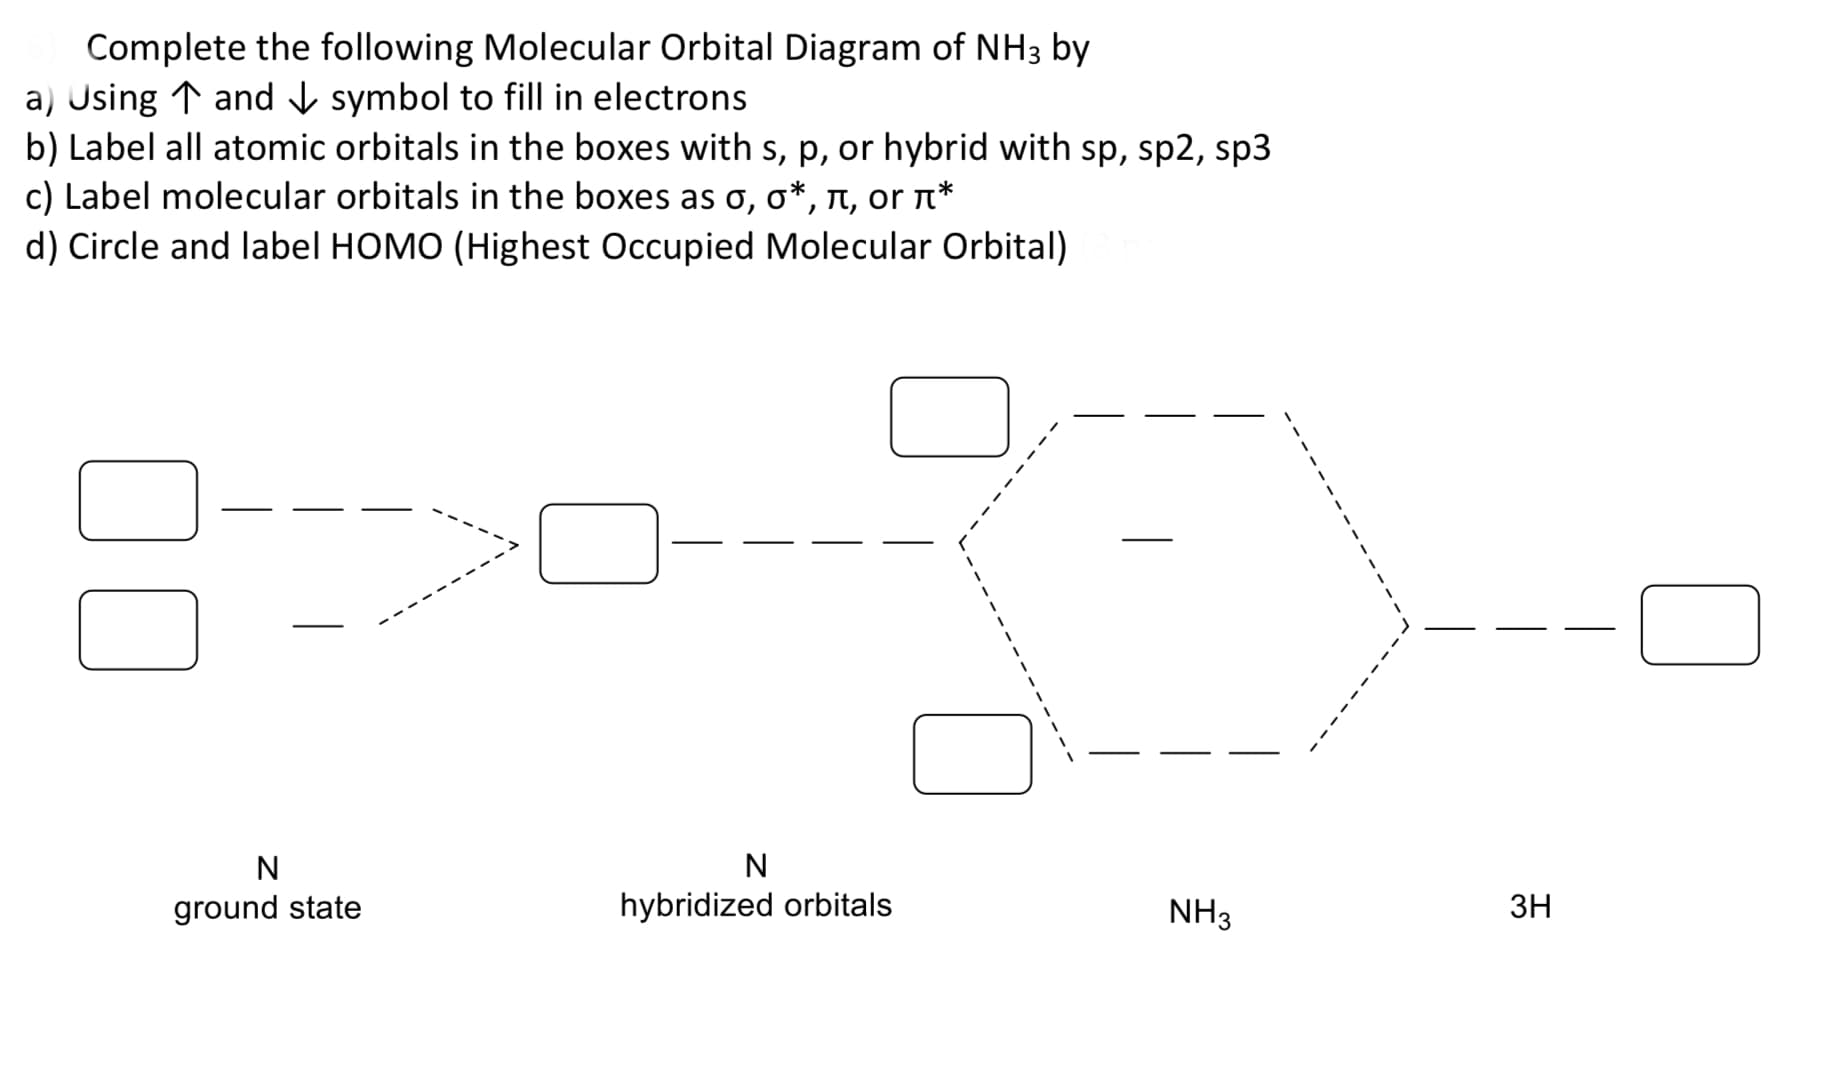 Complete the following Molecular Orbital Diagram of NH3 by
a) Using ↑ and V symbol to fill in electrons
b) Label all atomic orbitals in the boxes with s, p, or hybrid with sp, sp2, sp3
c) Label molecular orbitals in the boxes as o, o*, n, or n*
d) Circle and label HOMO (Highest Occupied Molecular Orbital)
